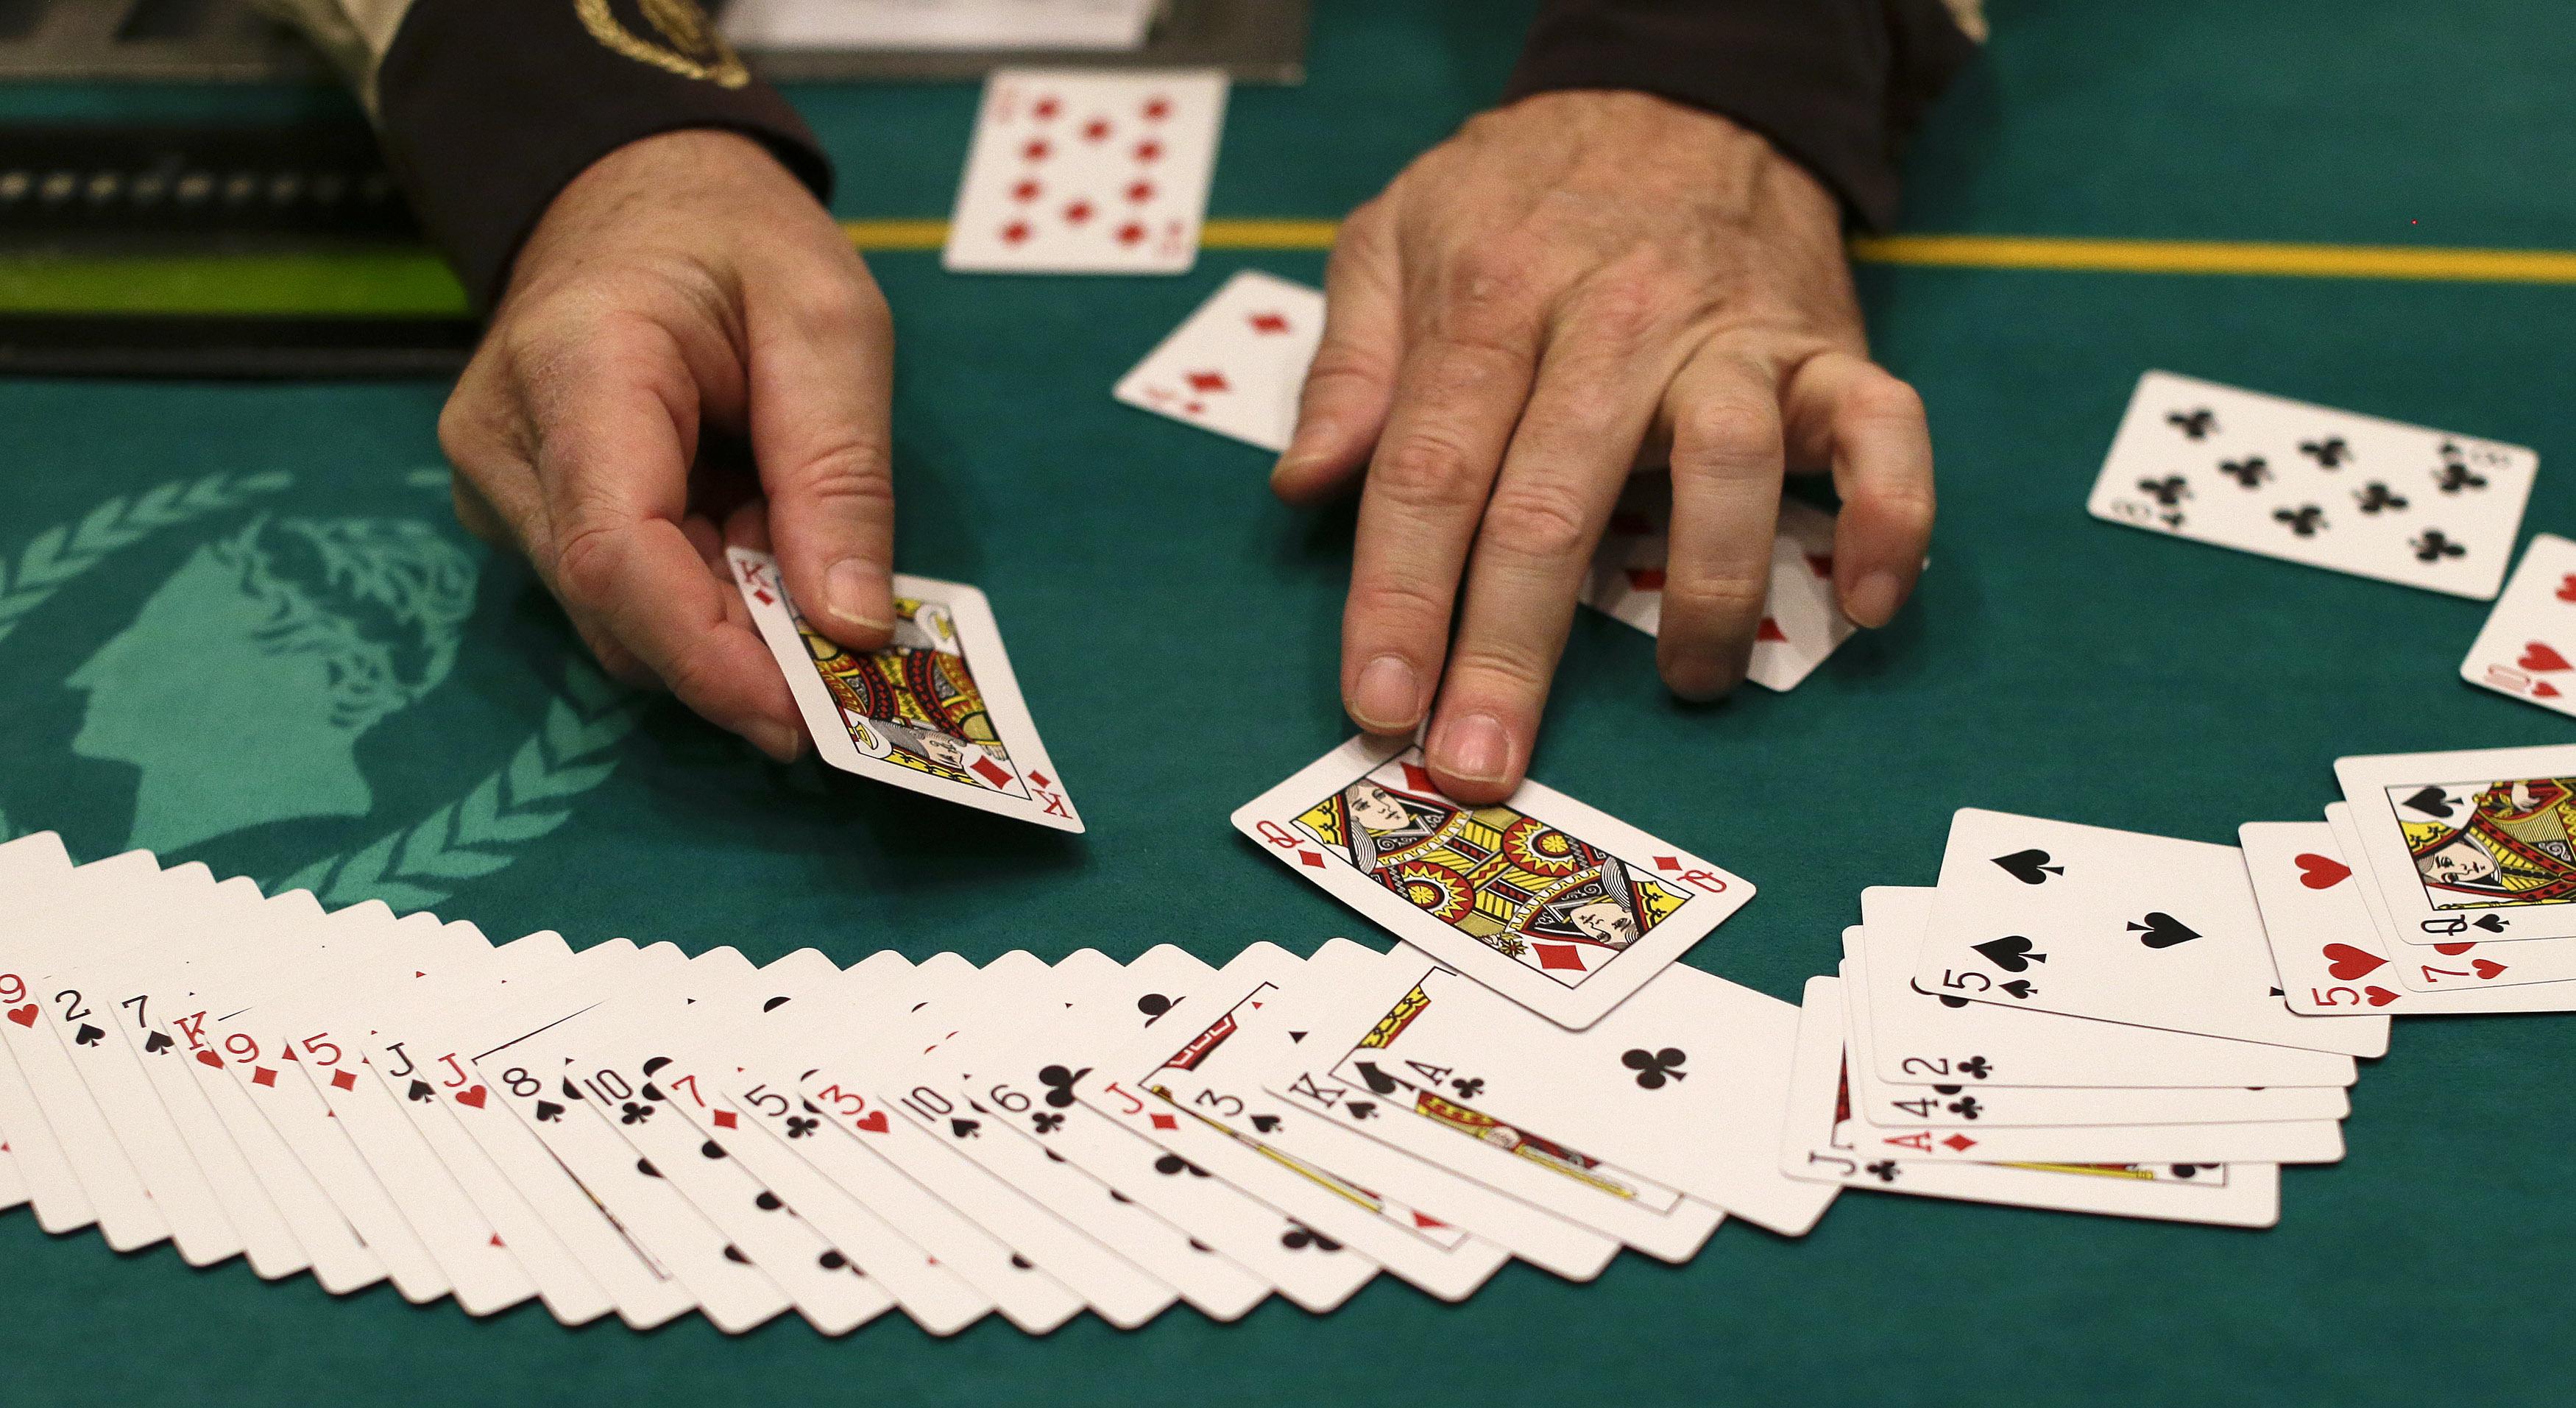 California's 2nd largest card room pays $6 million in fines – New